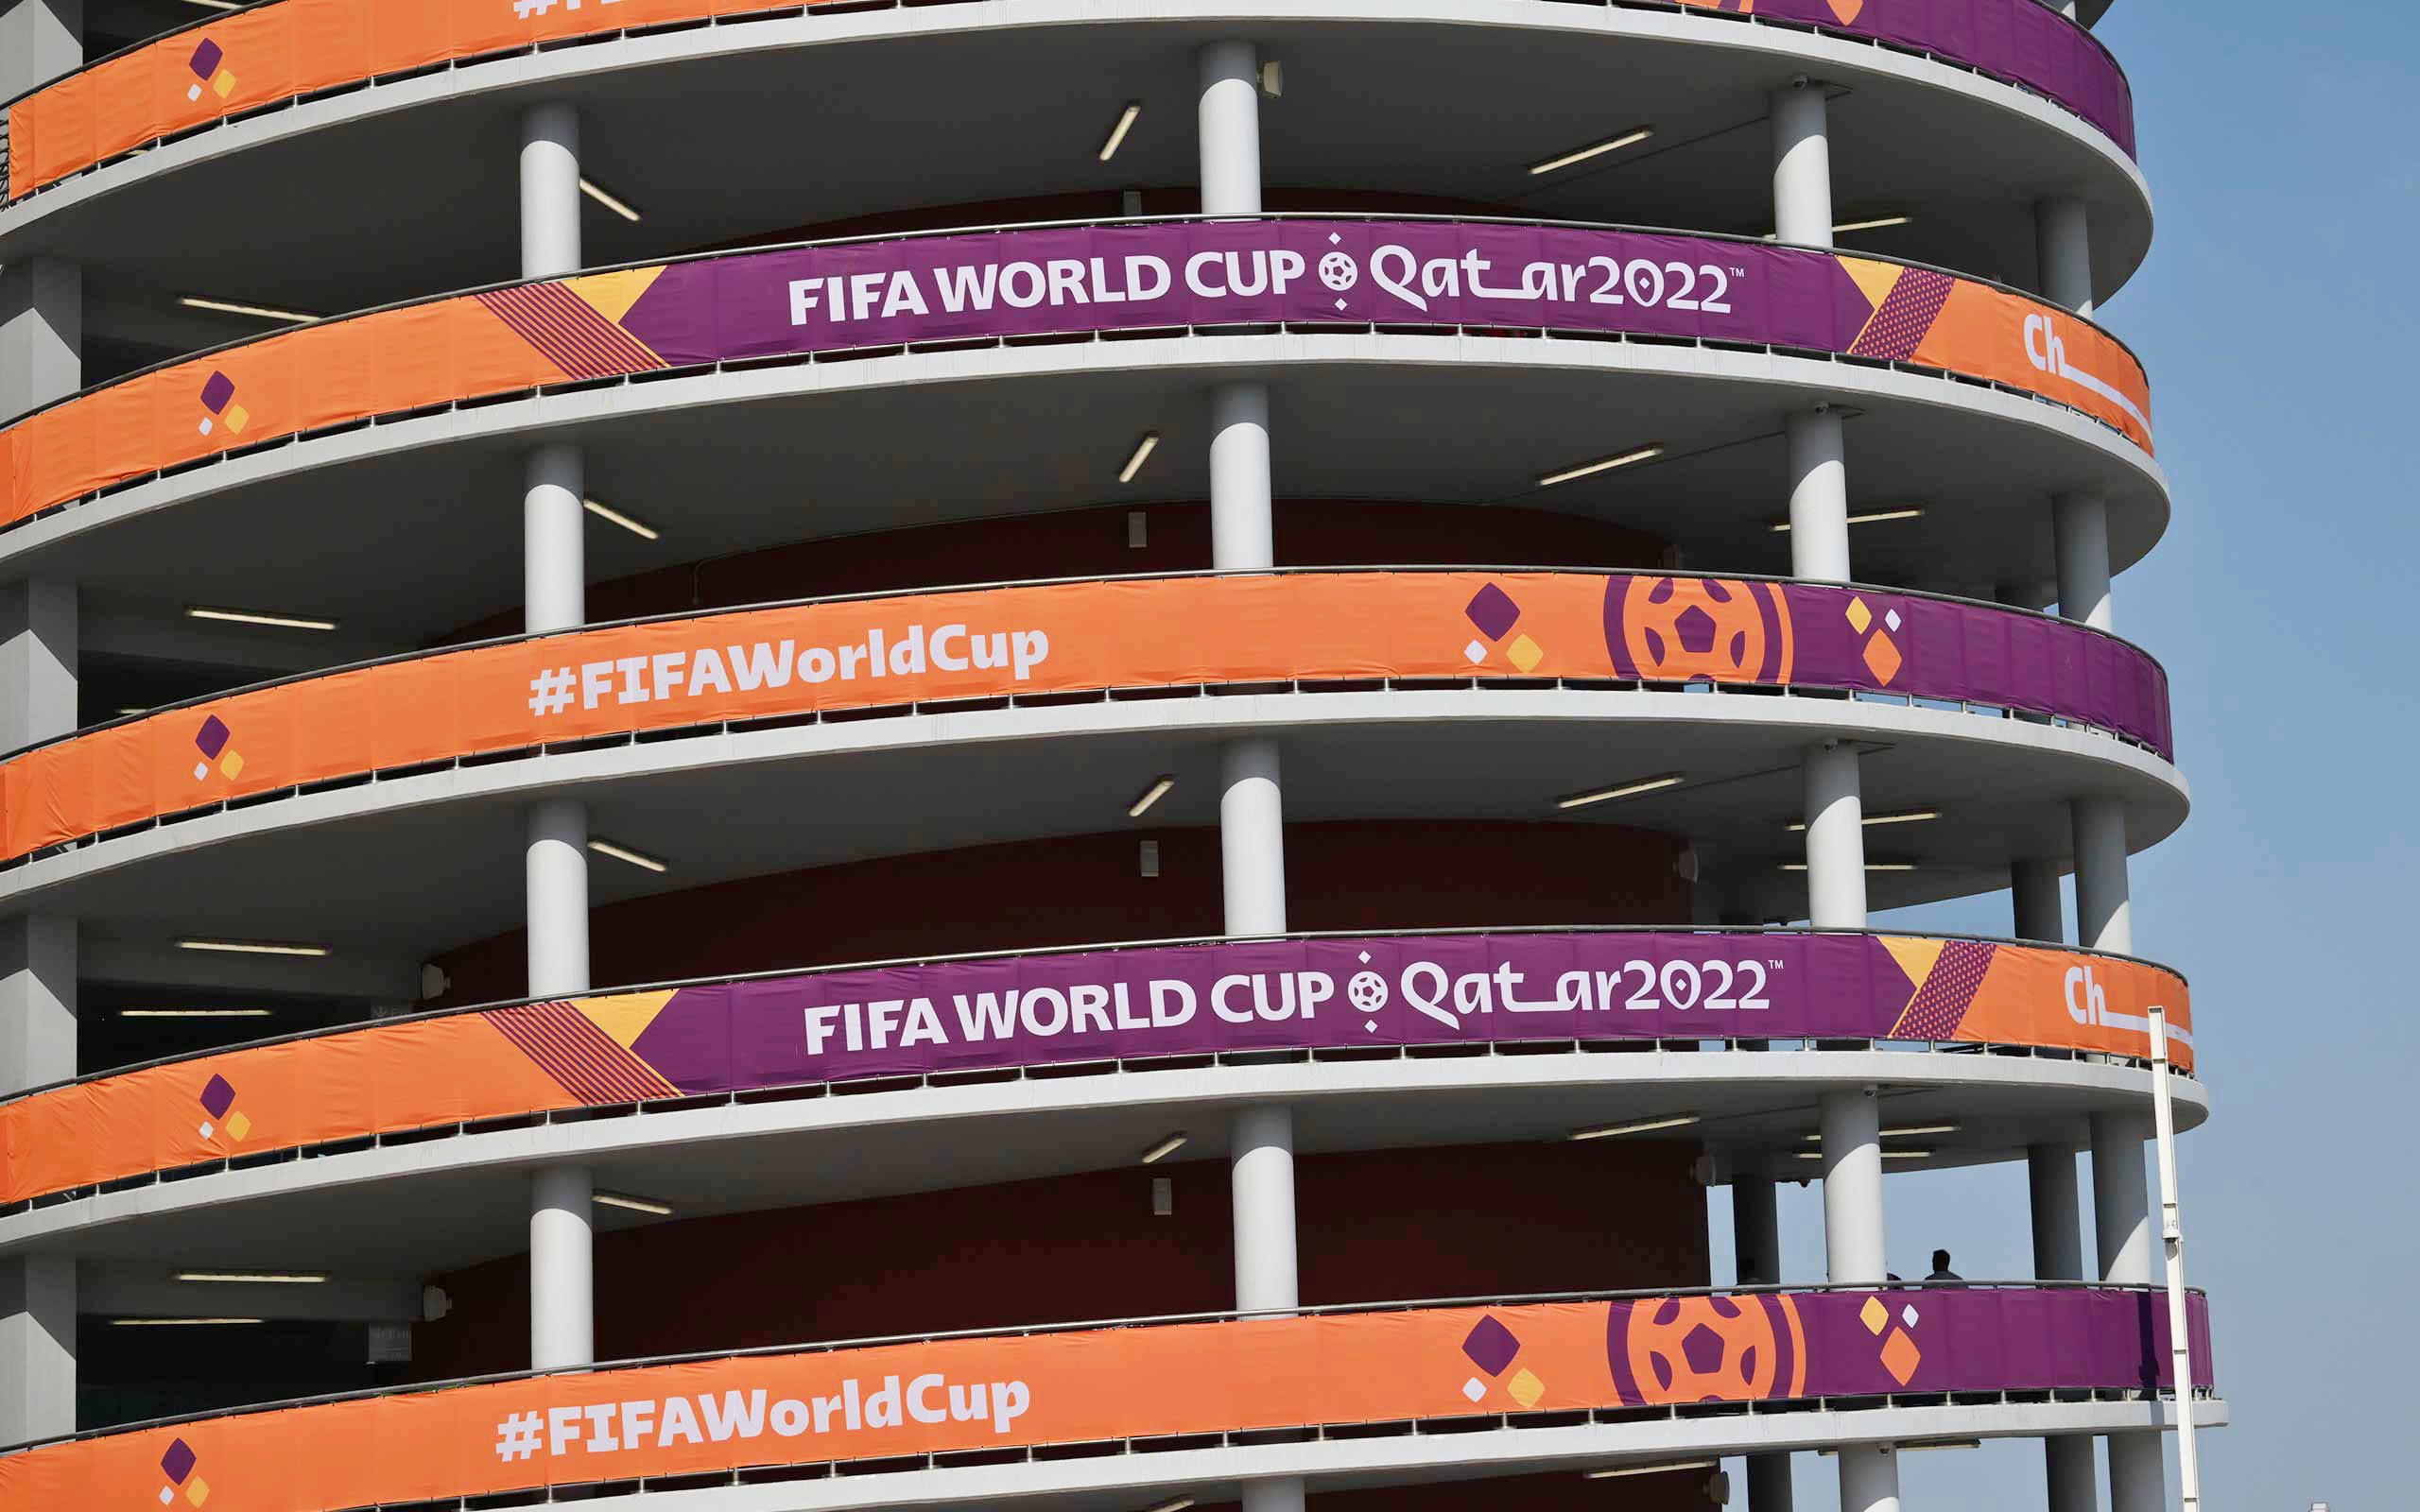 The Look Company delivered branding solutions for FIFA World Cup Qatar 2022